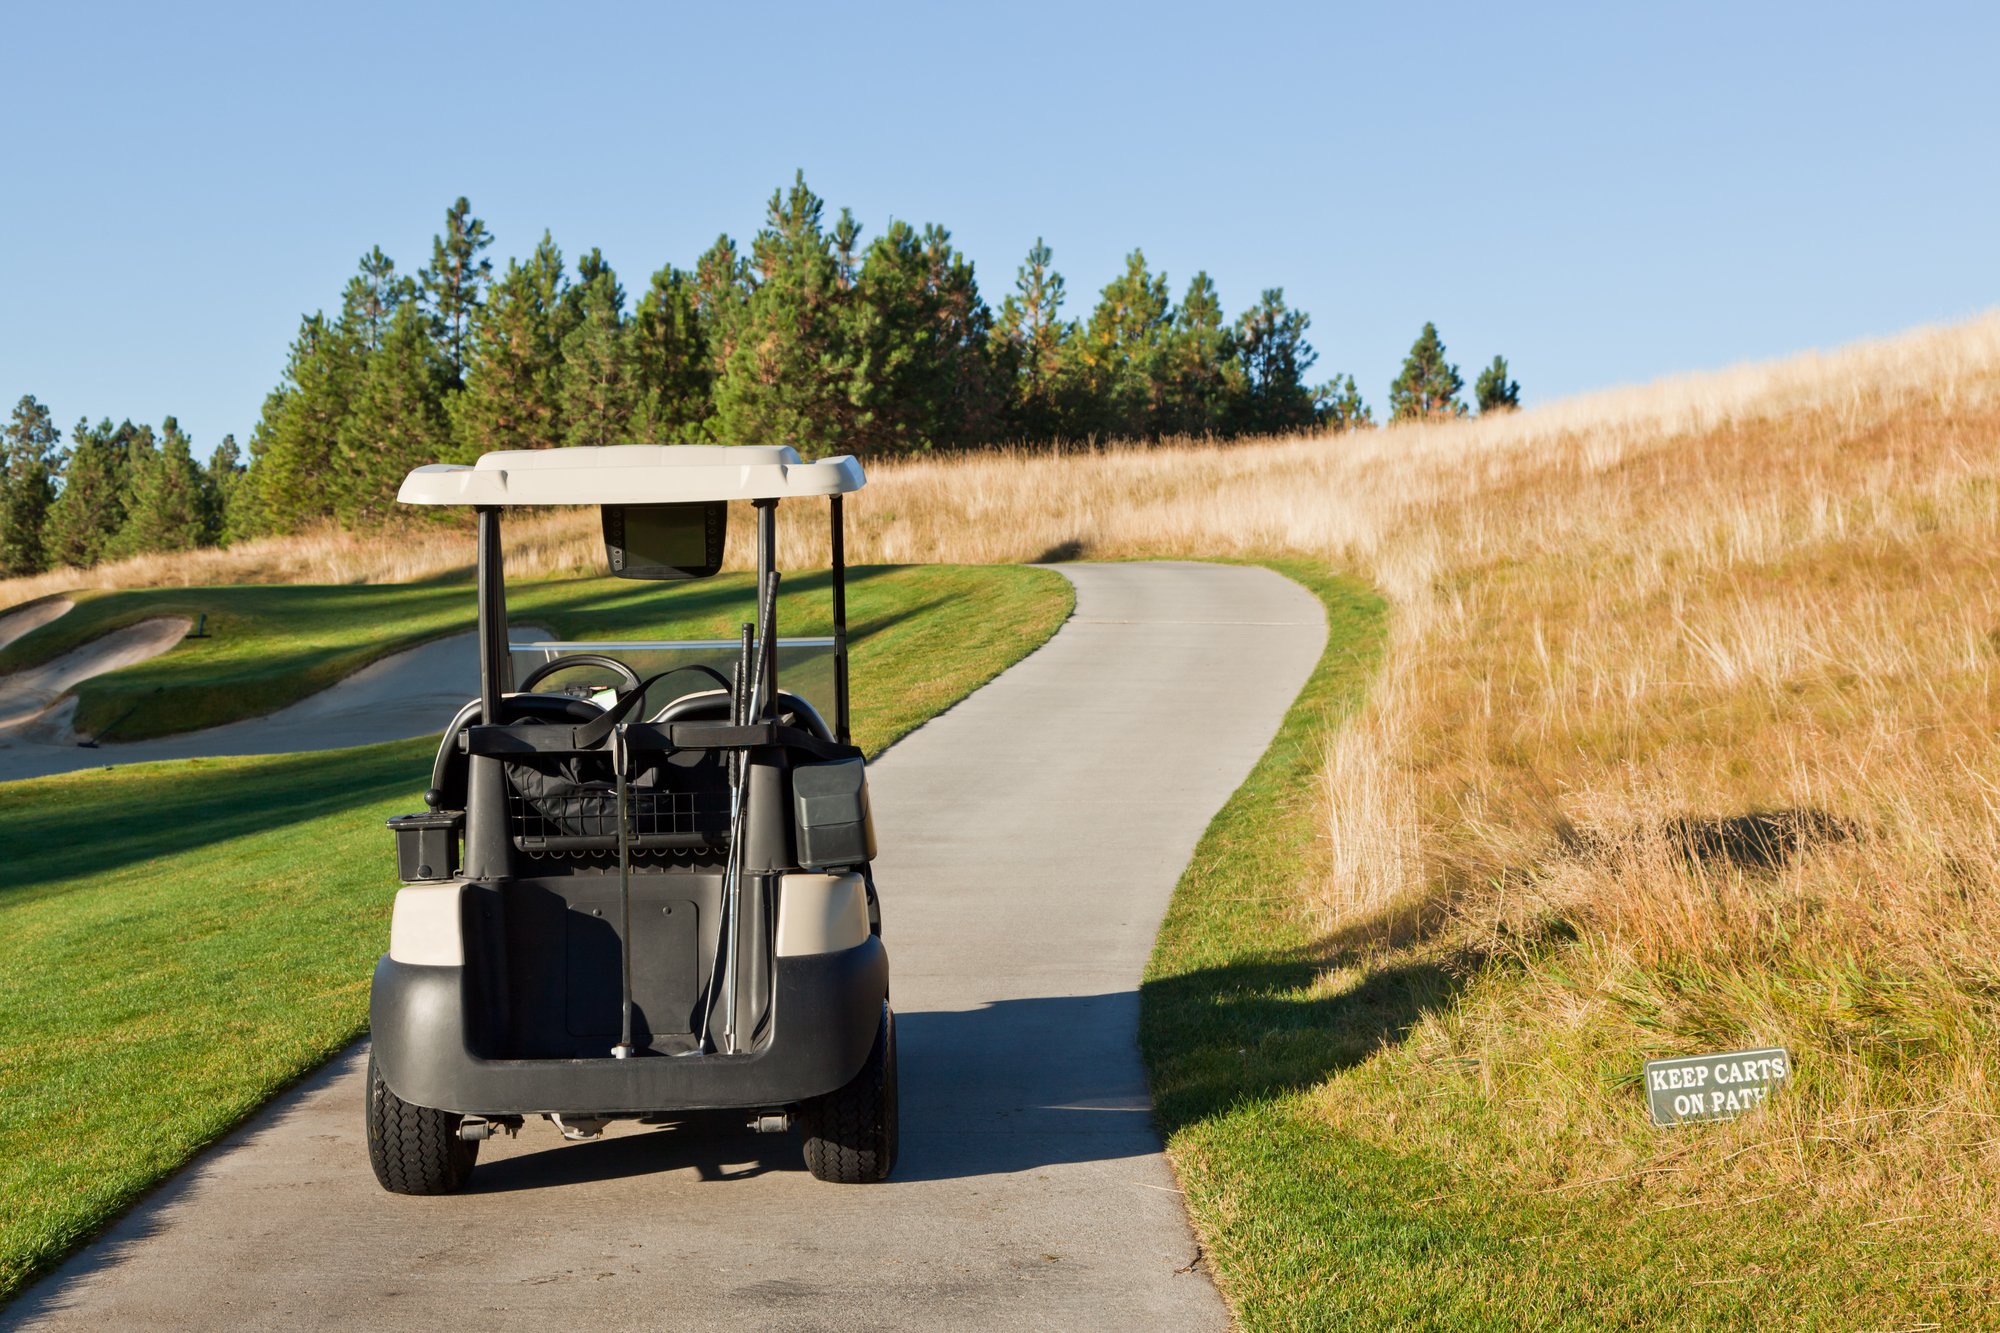 5 Biggest Tips to Maintain a Golf Cart